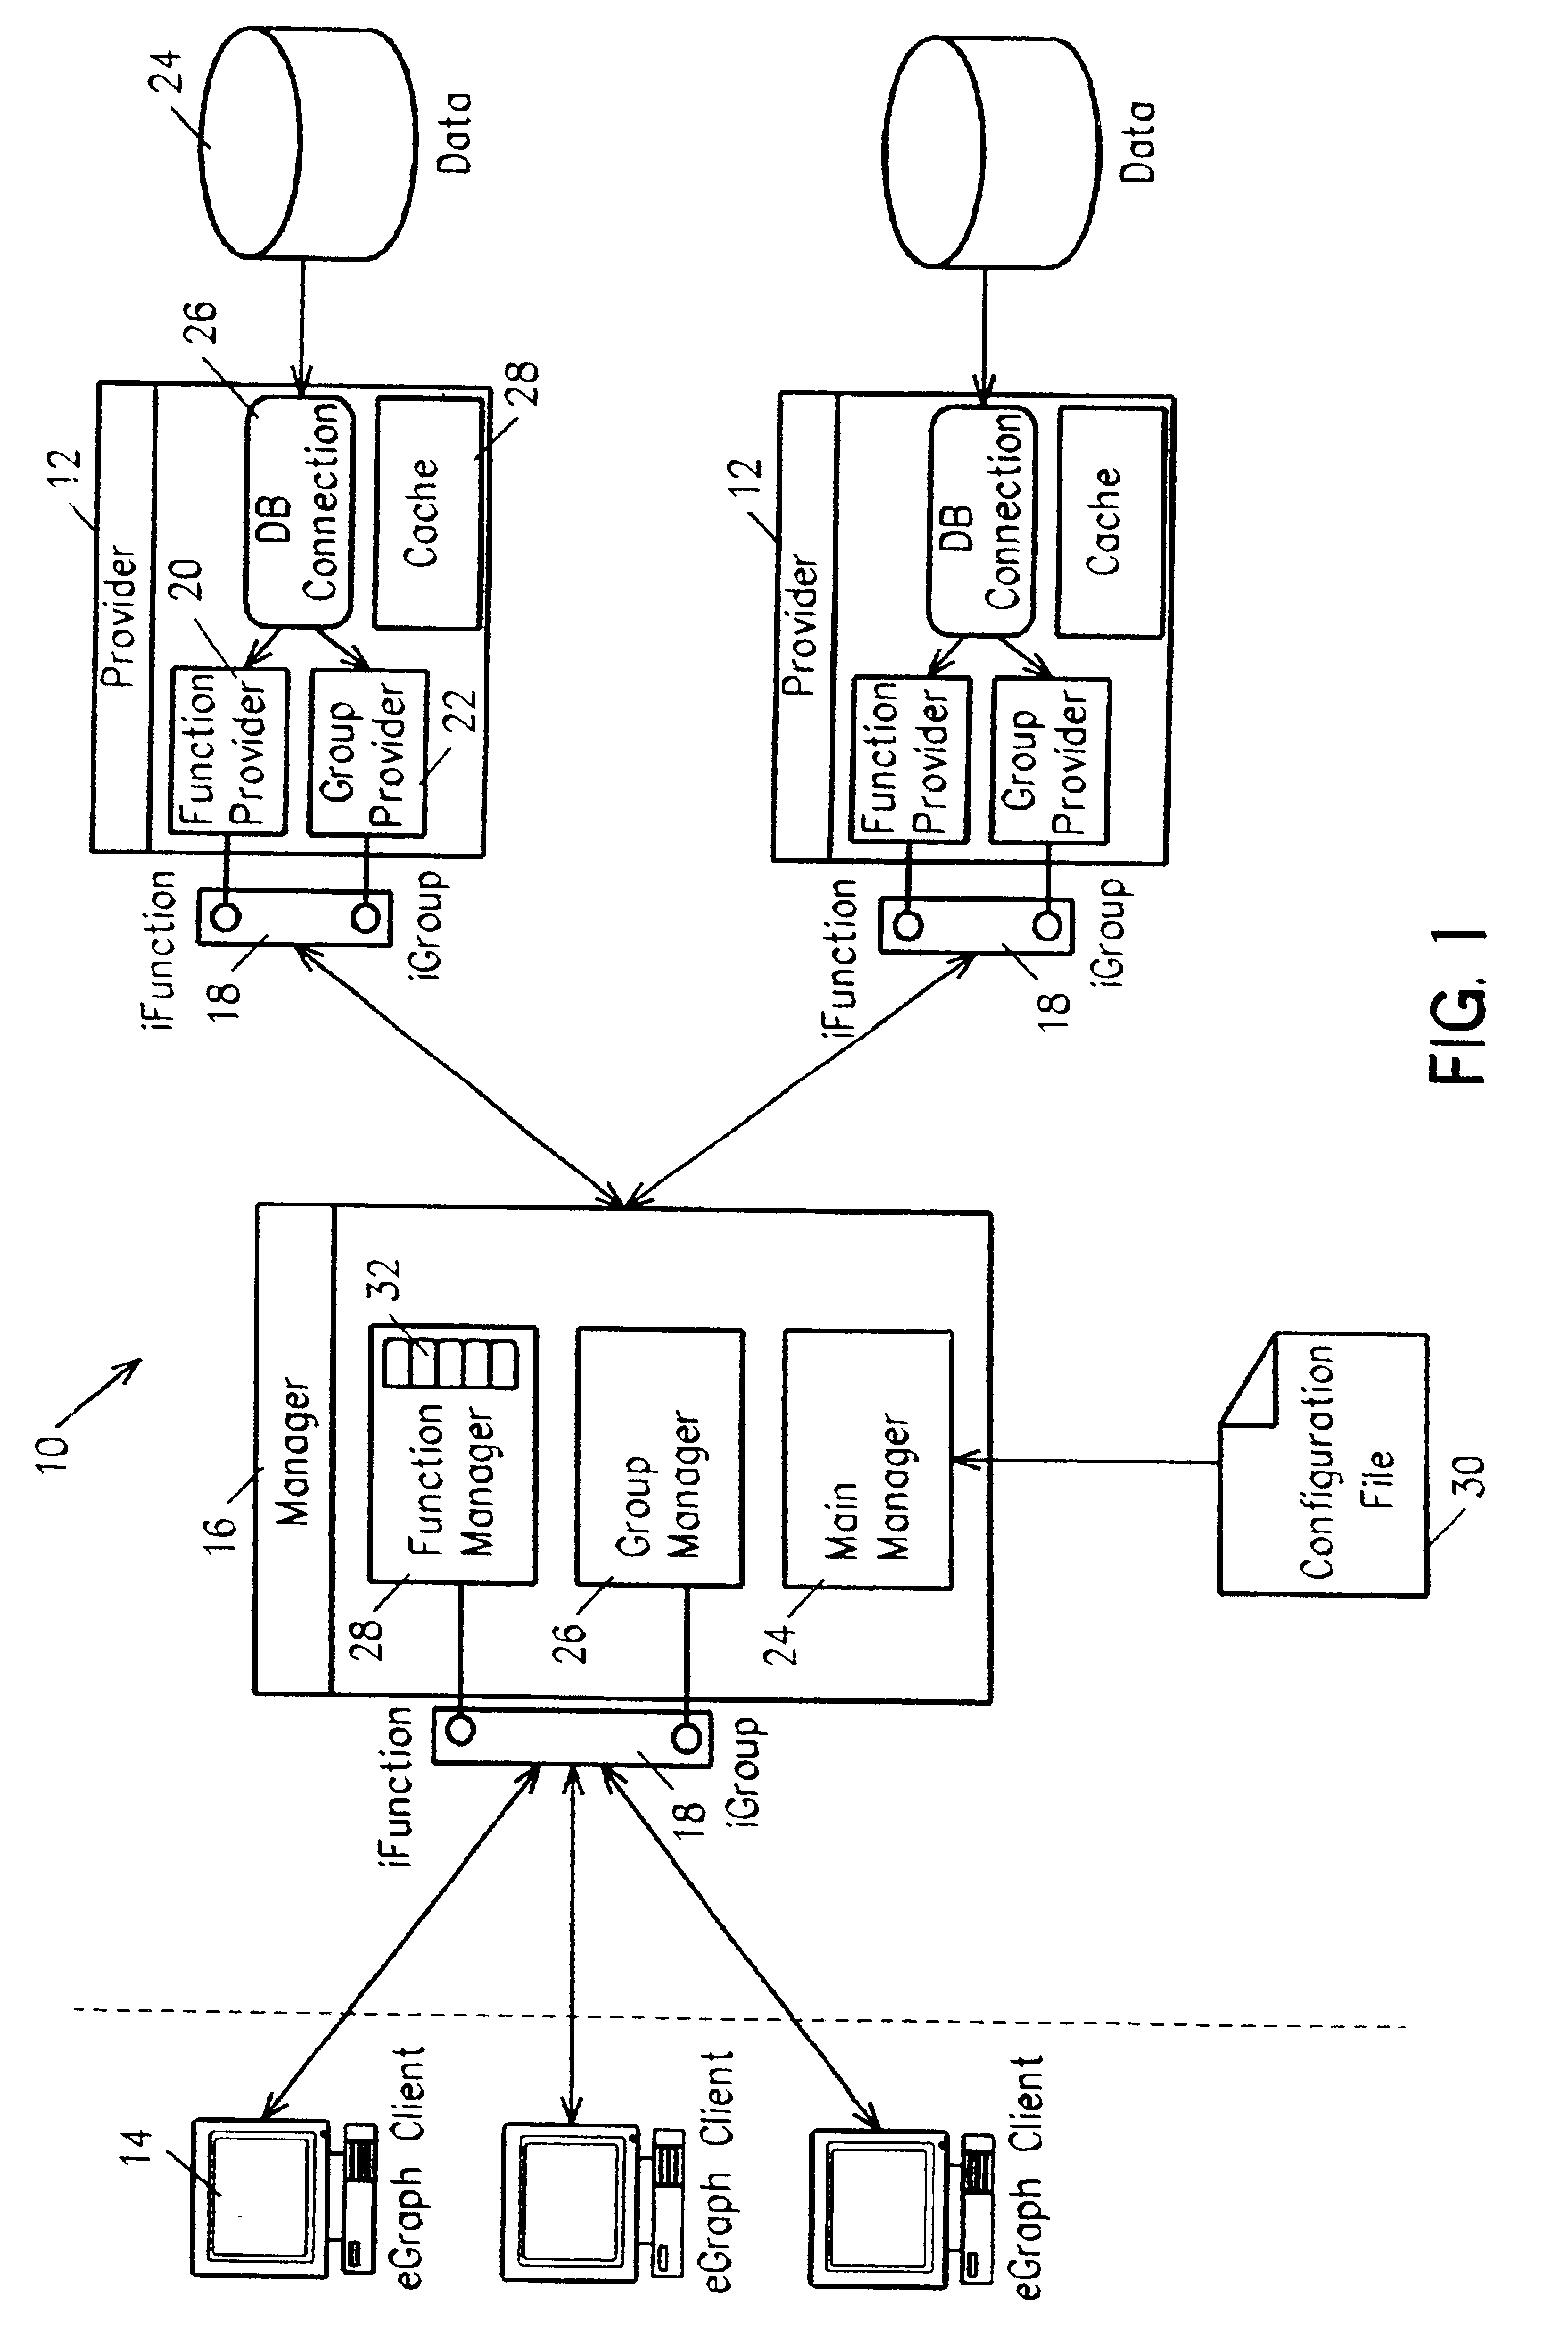 Method and system for providing distributed functionaltiy and data analysis system utilizing same